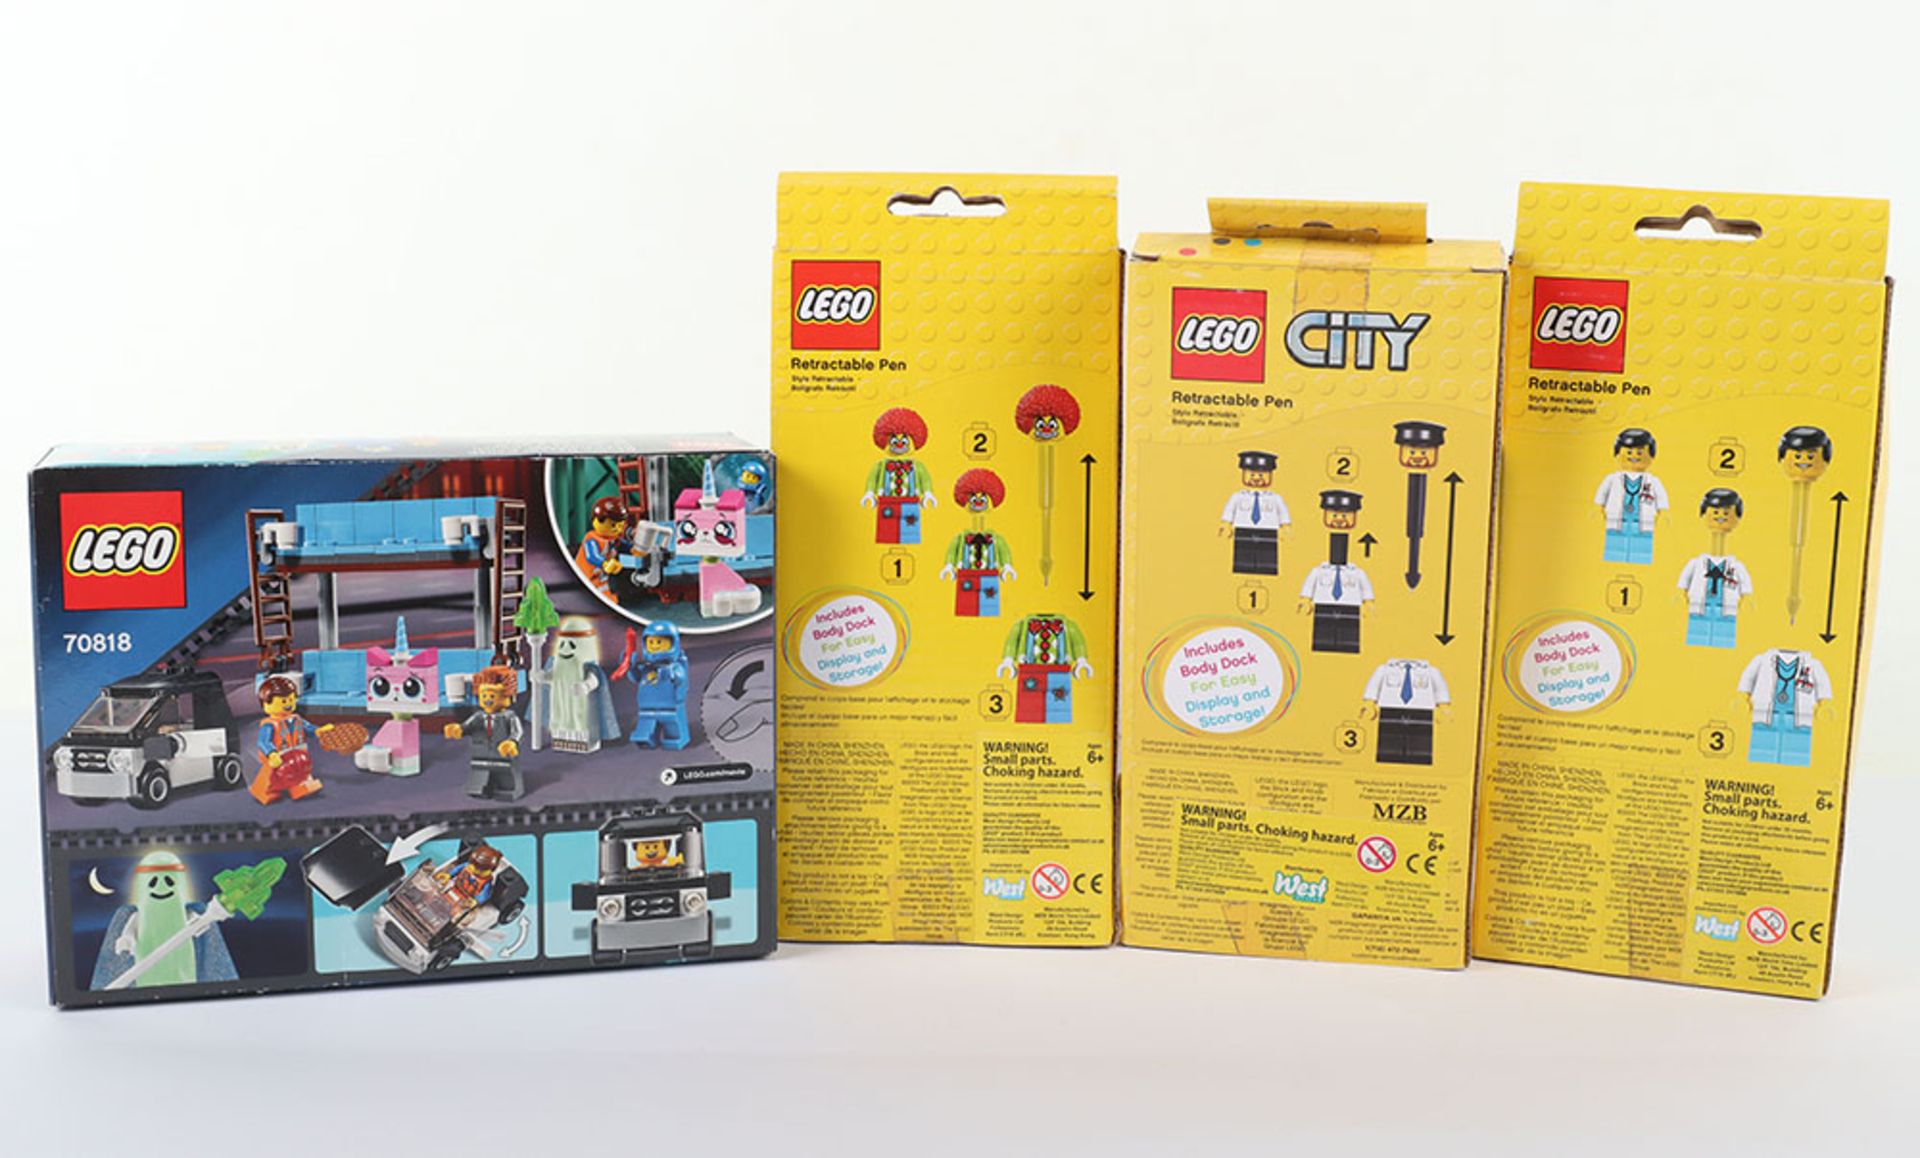 Lego “The Lego Movie” 70818 Double-Decker Couch sealed with minifigure pens - Image 2 of 4